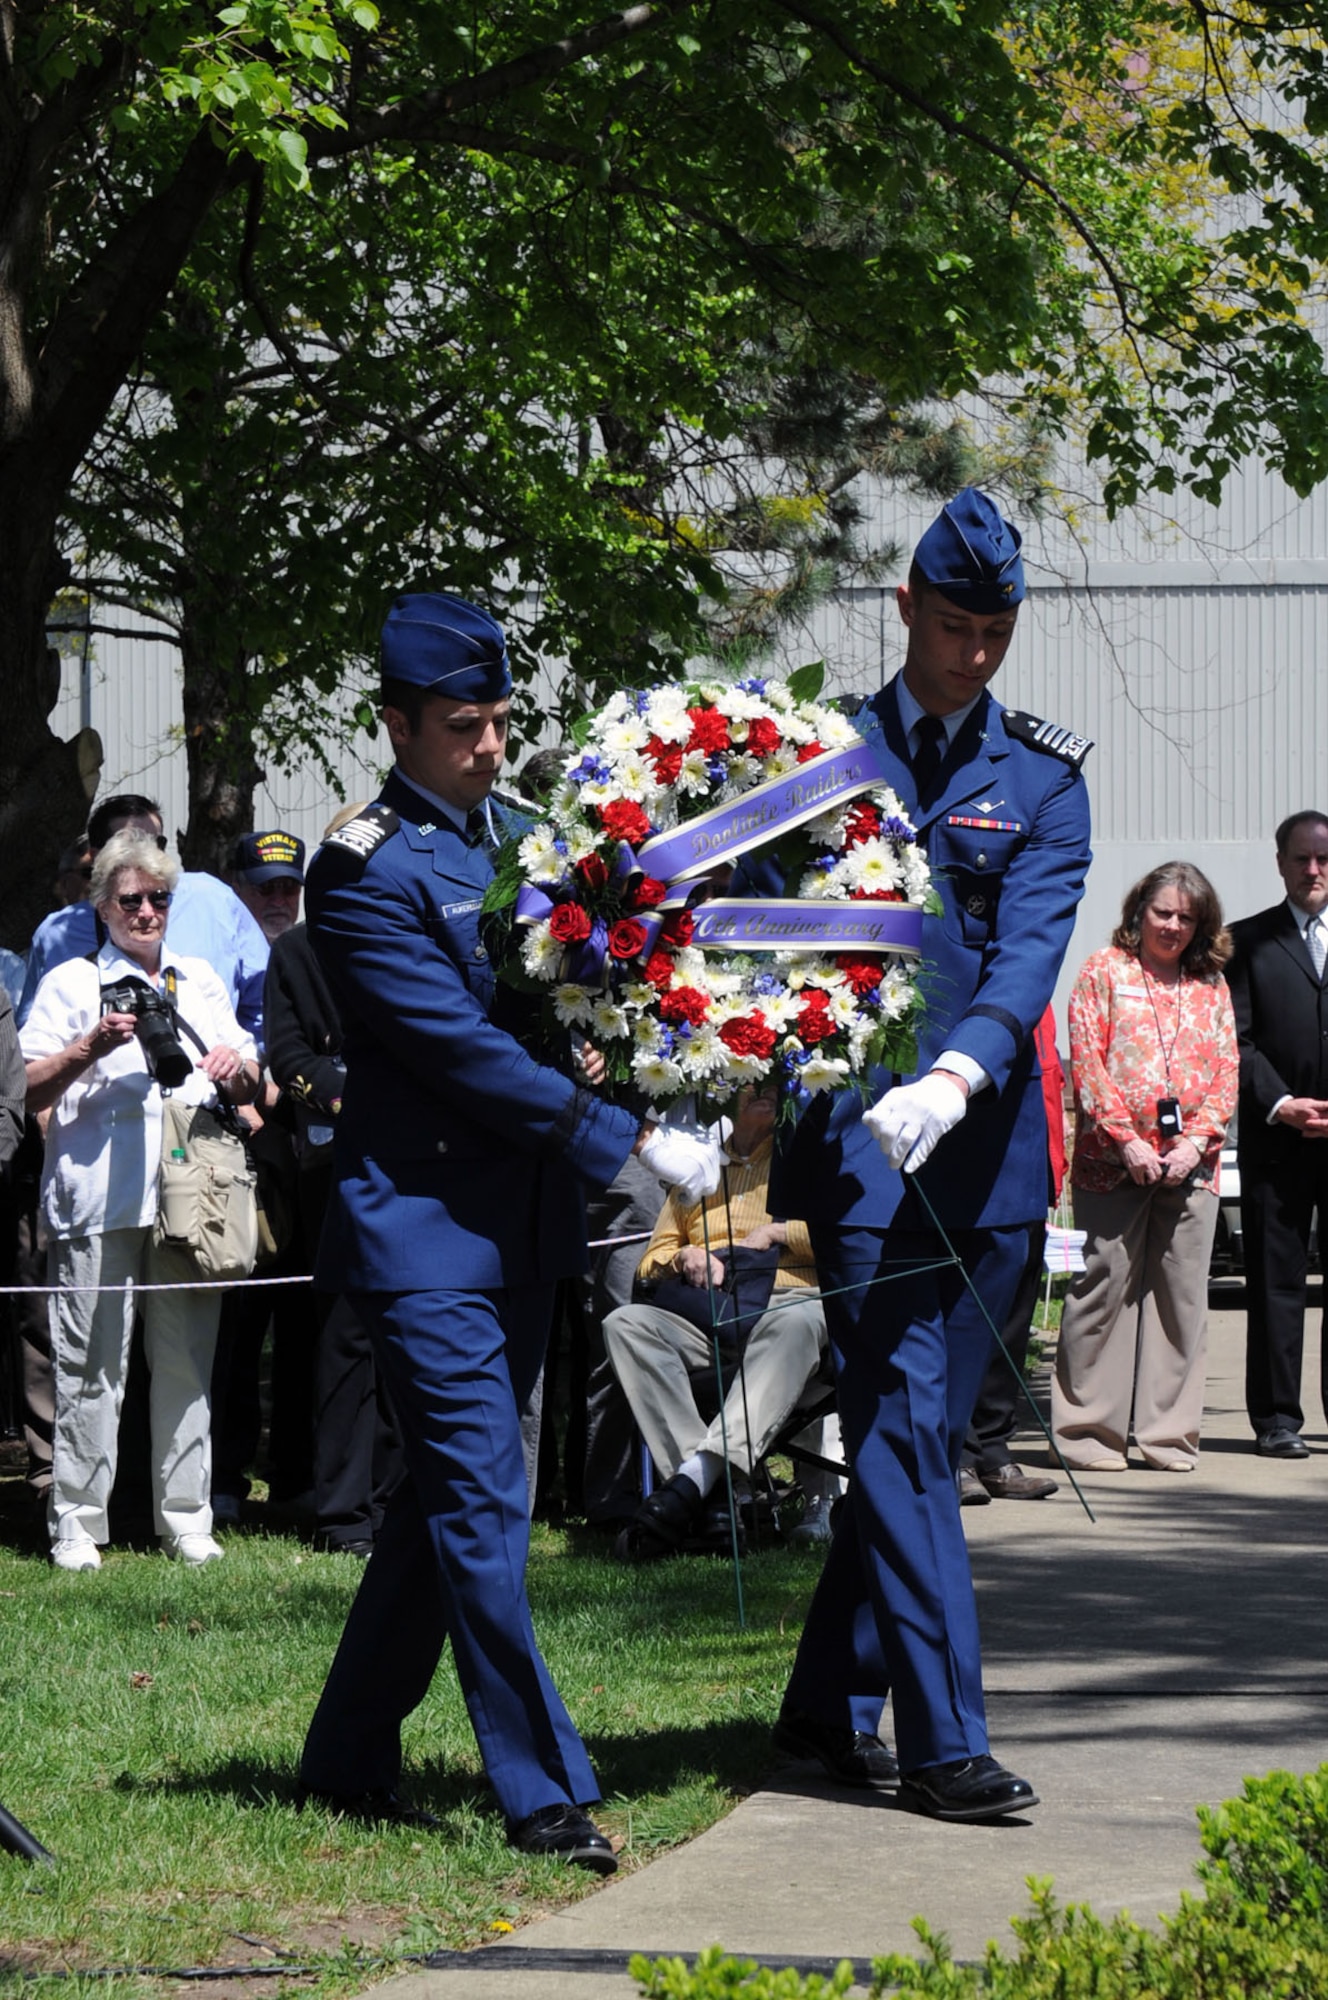 Two cadets from the Air Force Academy present a wreath during a memorial service in honor of the Doolittle Raiders 70th Anniversary Reunion in 2012. Public activities for the Final Toast on Nov. 9 will include a wreath-laying ceremony in Memorial Park, followed by B-25 flyover. 



